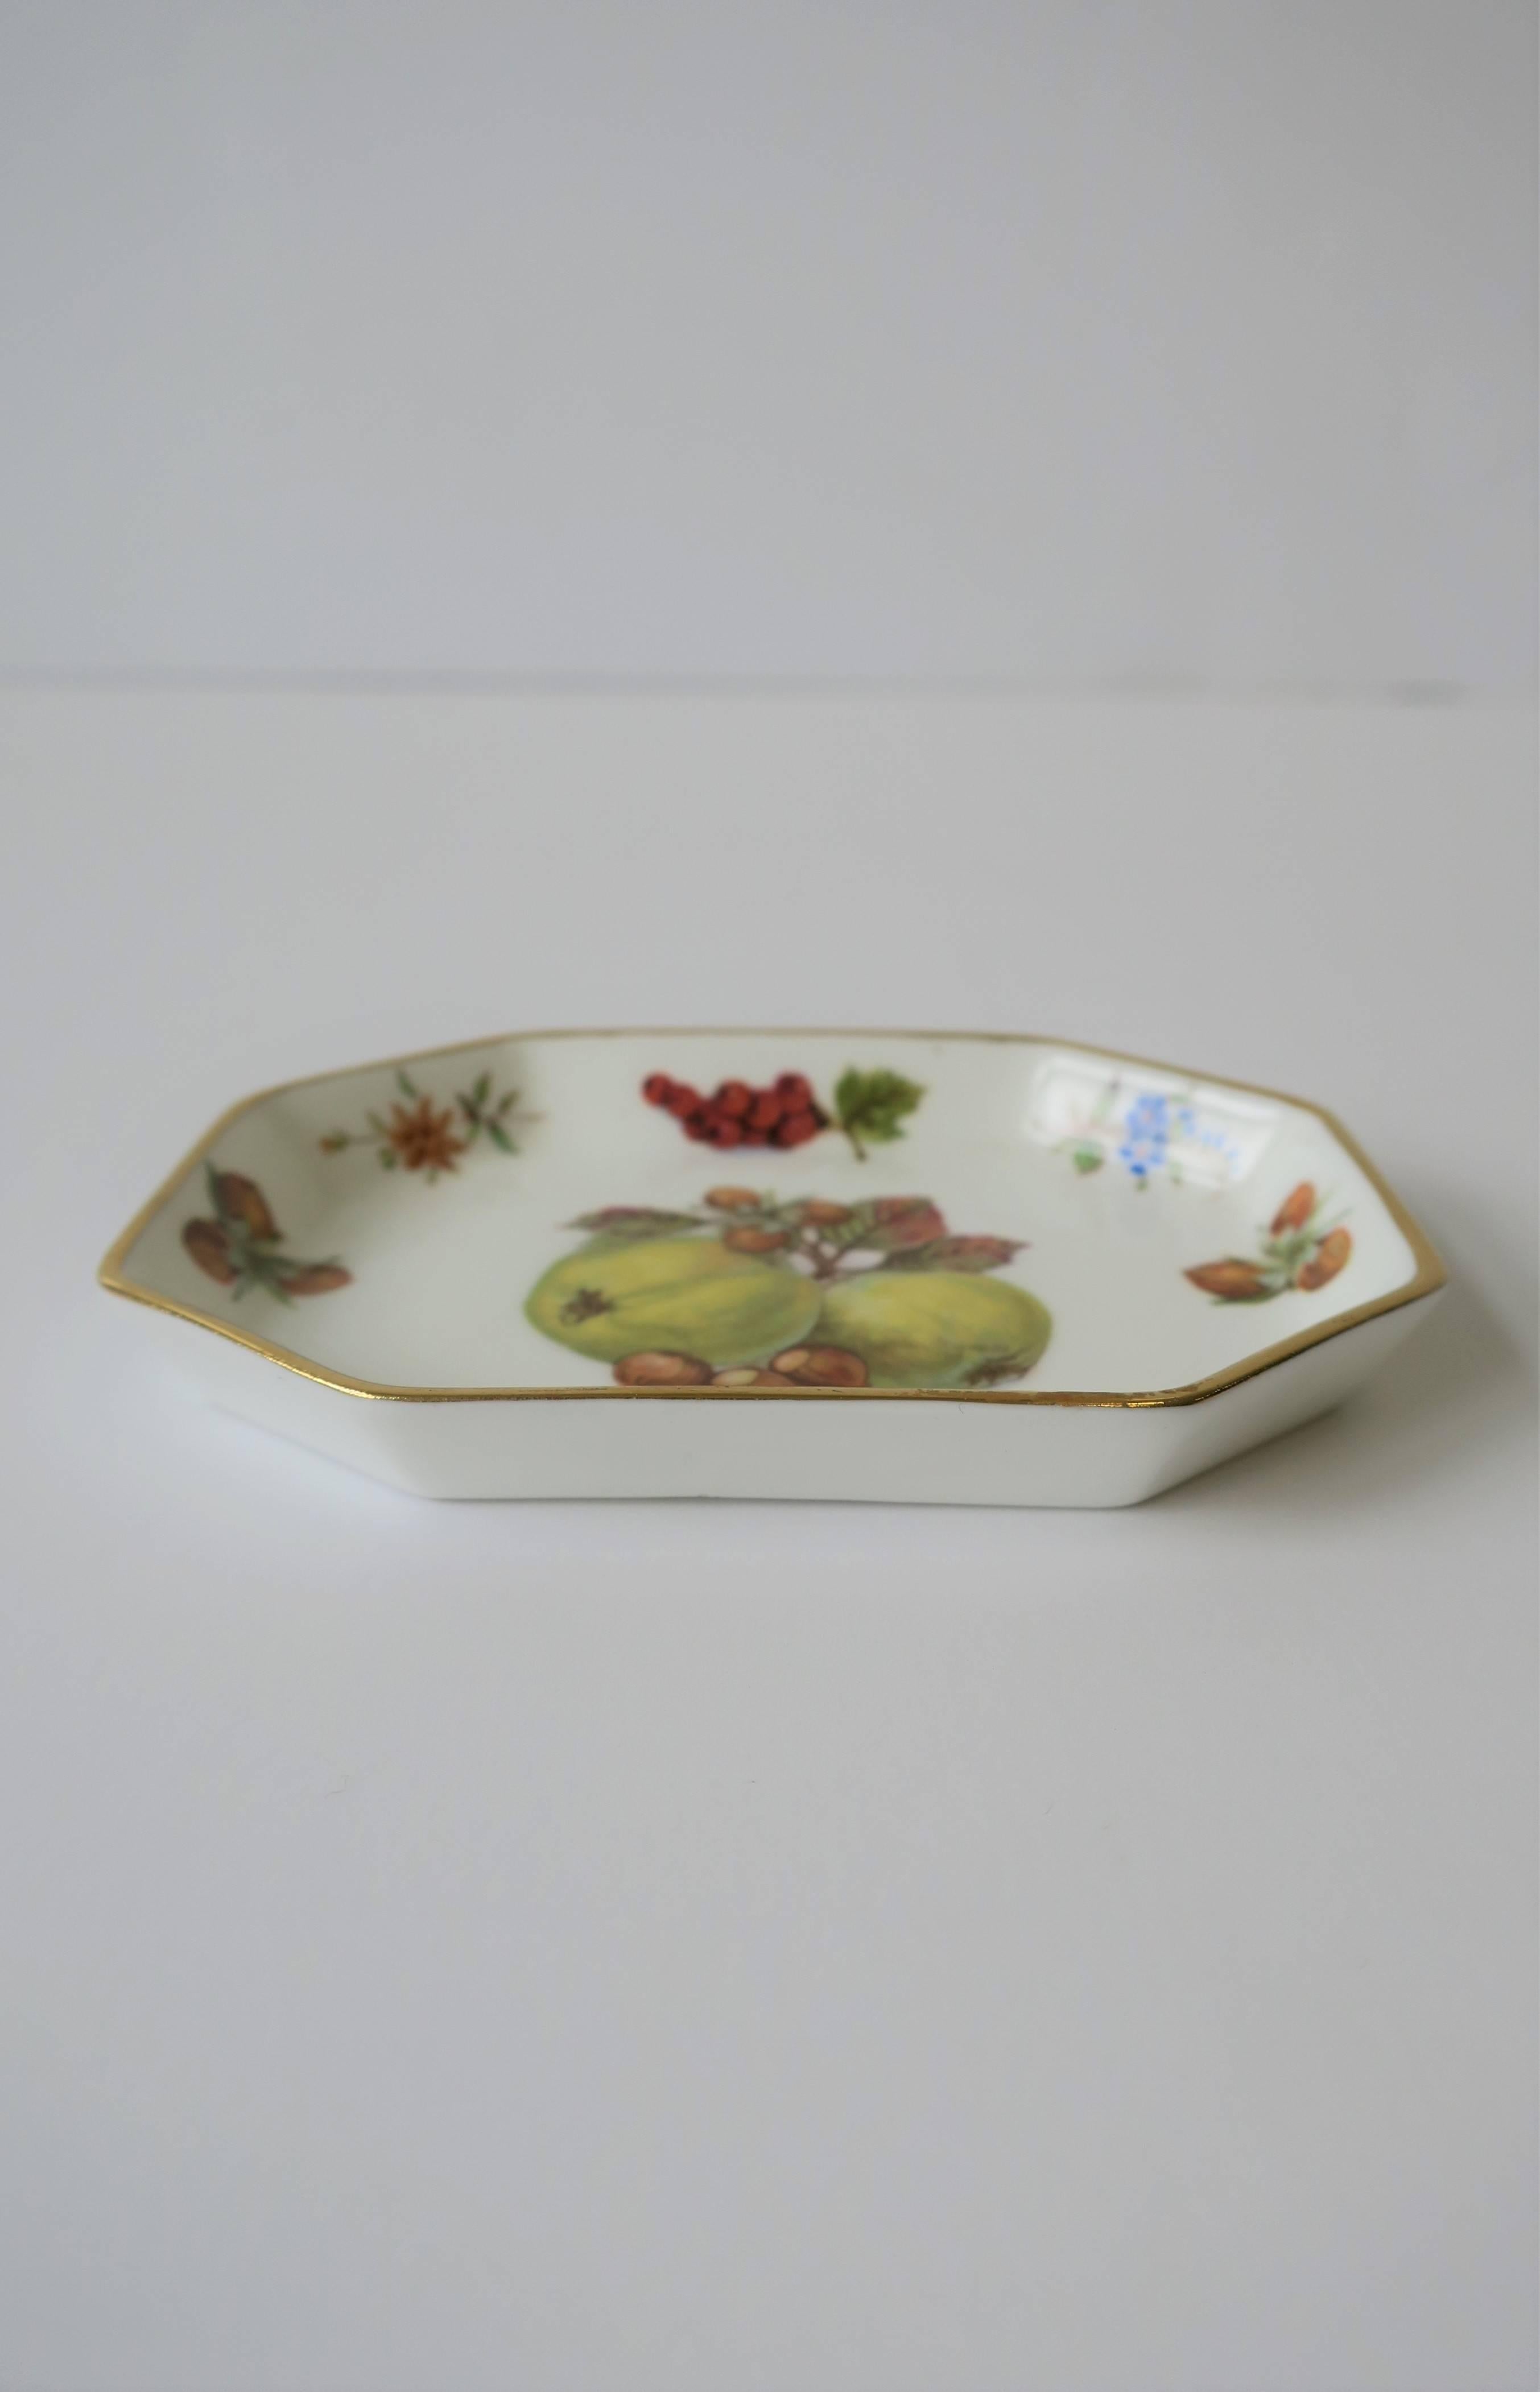 20th Century English Porcelain Jewelry Dish with Fruit Design by Hammersley For Sale